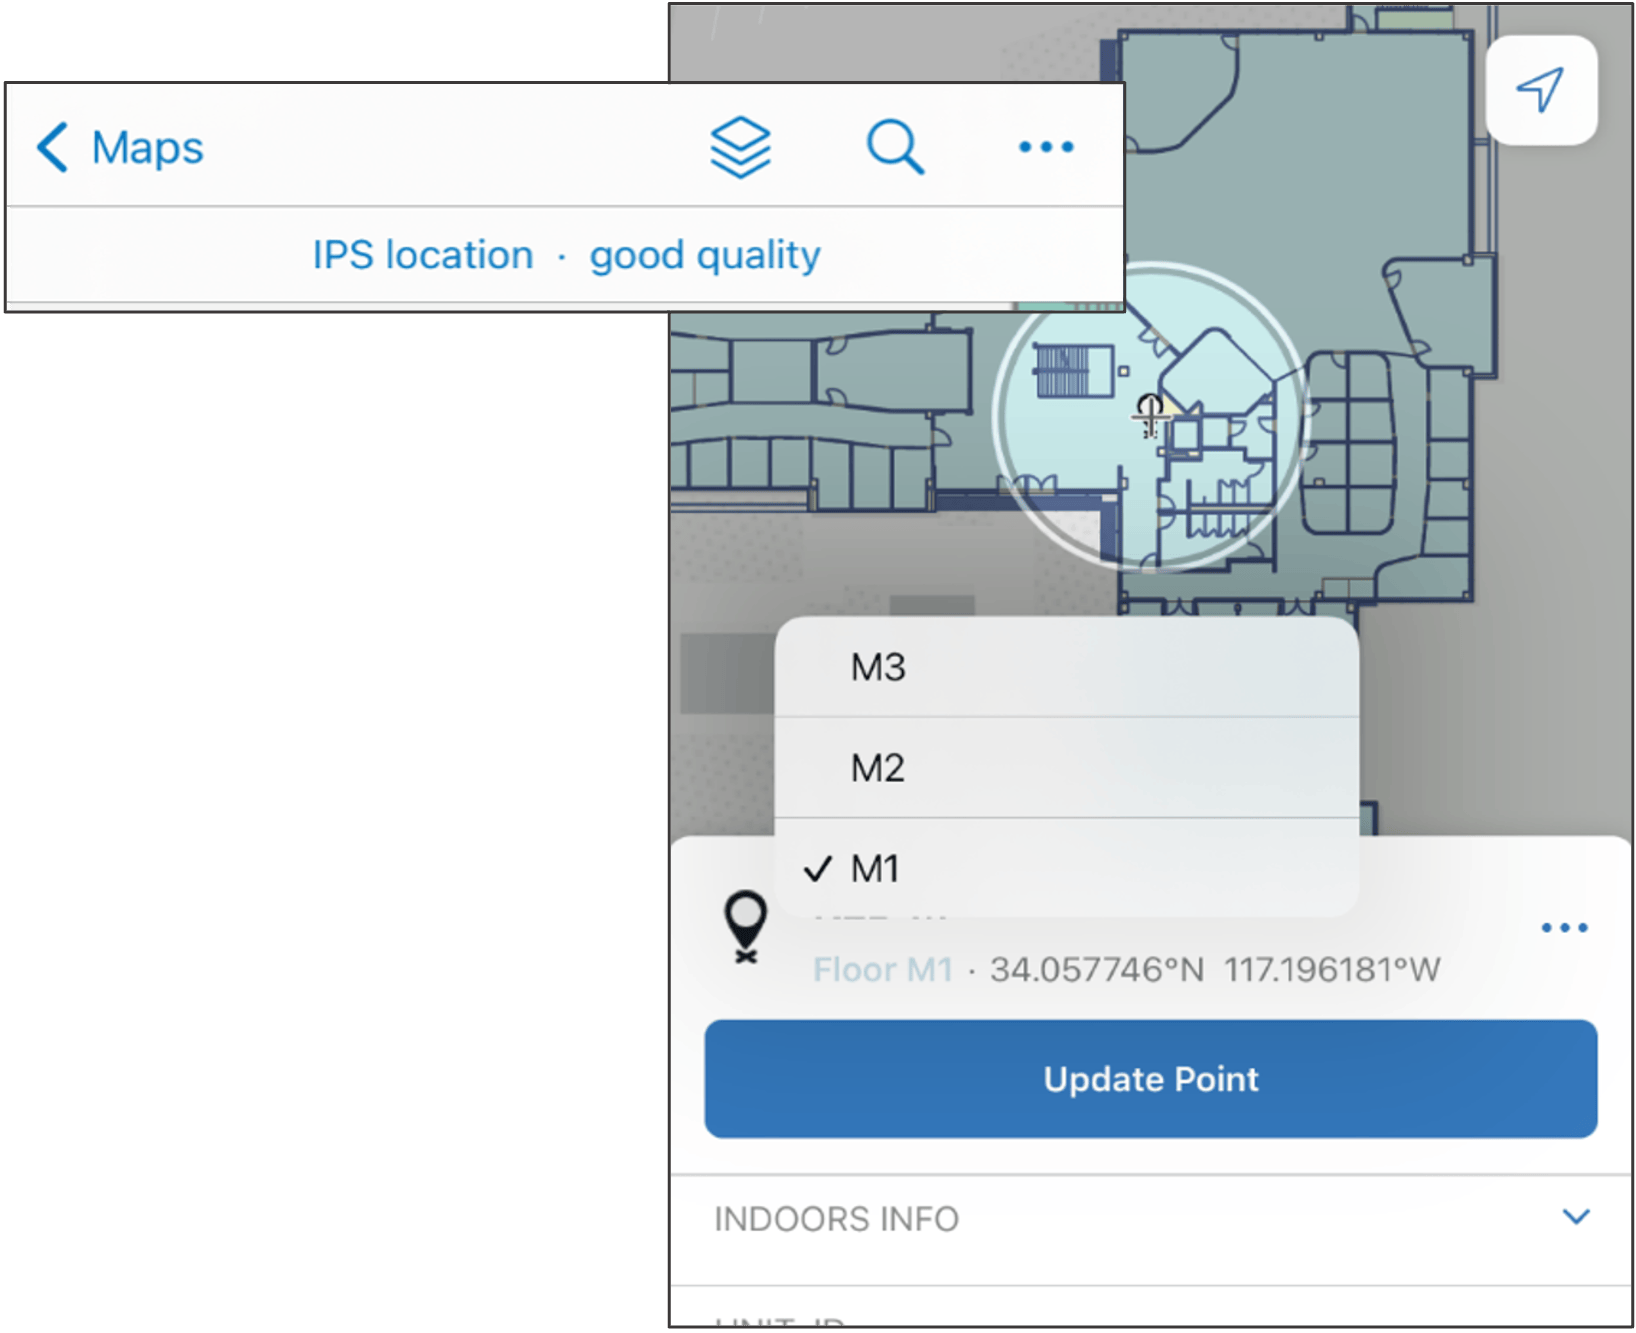 Field Maps continues to add support for indoor positioning and editing